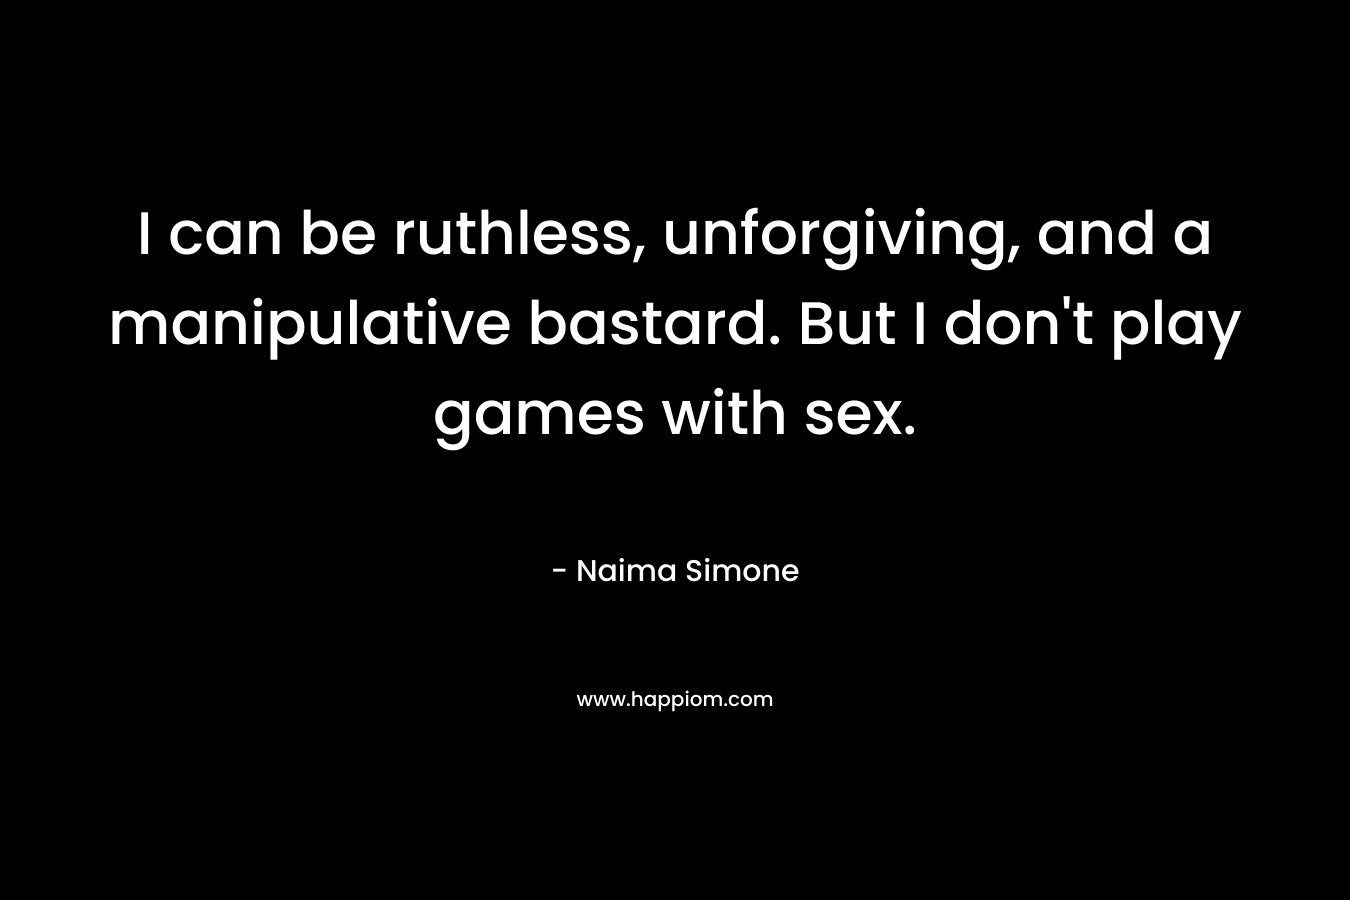 I can be ruthless, unforgiving, and a manipulative bastard. But I don't play games with sex.